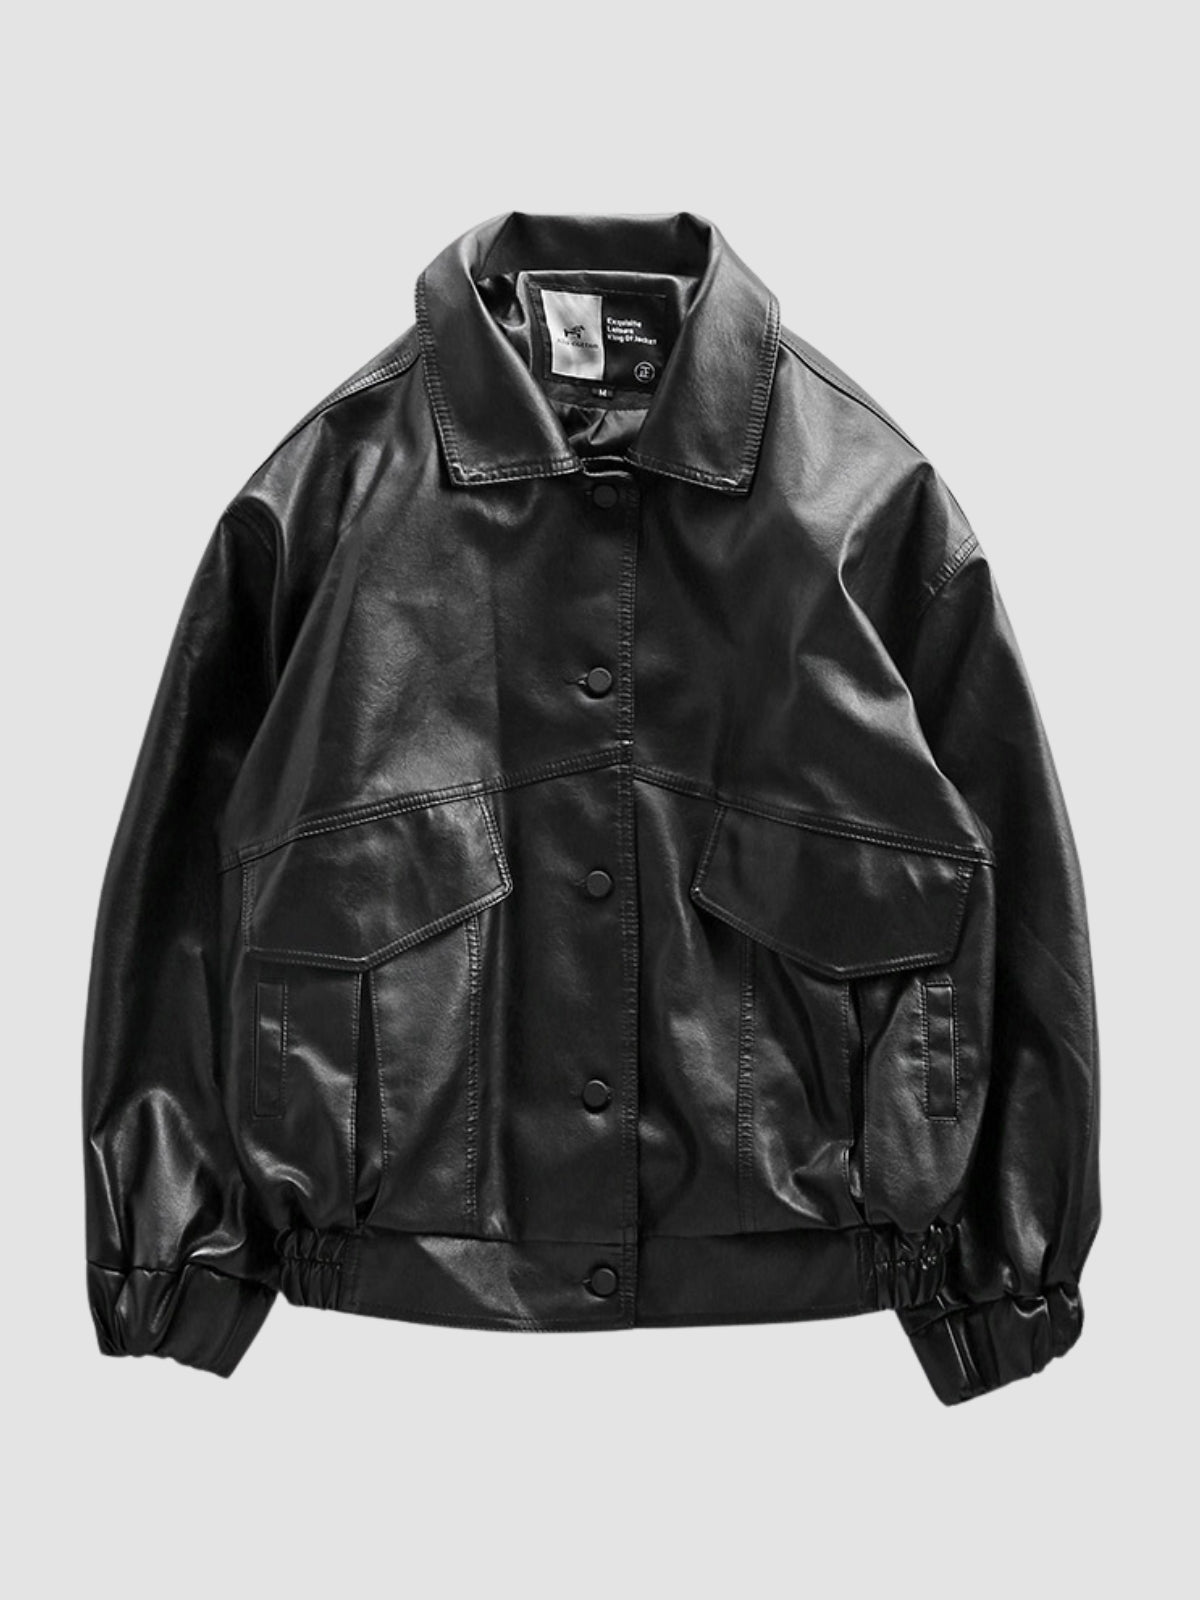 WLS Retro Loose Motorcycle Suit Embroidered Leather Jacket